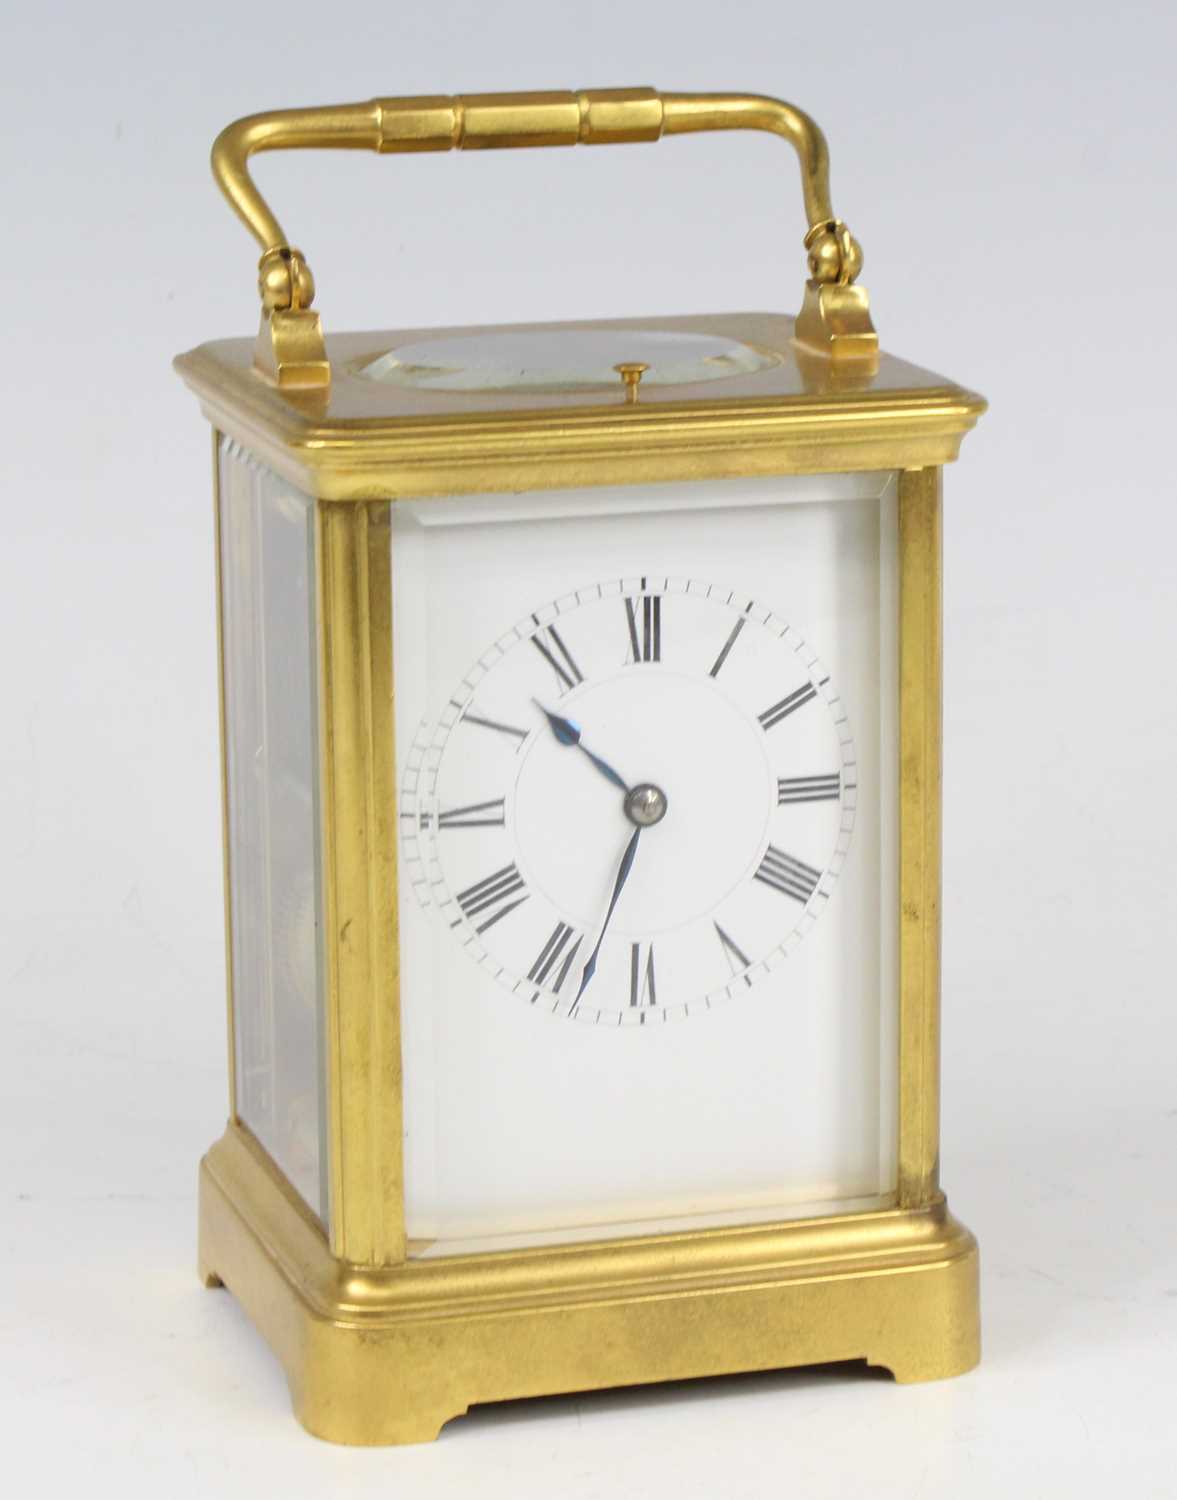 A late 19th century French lacquered brass carriage clock by Henri Jacot of Paris, having an